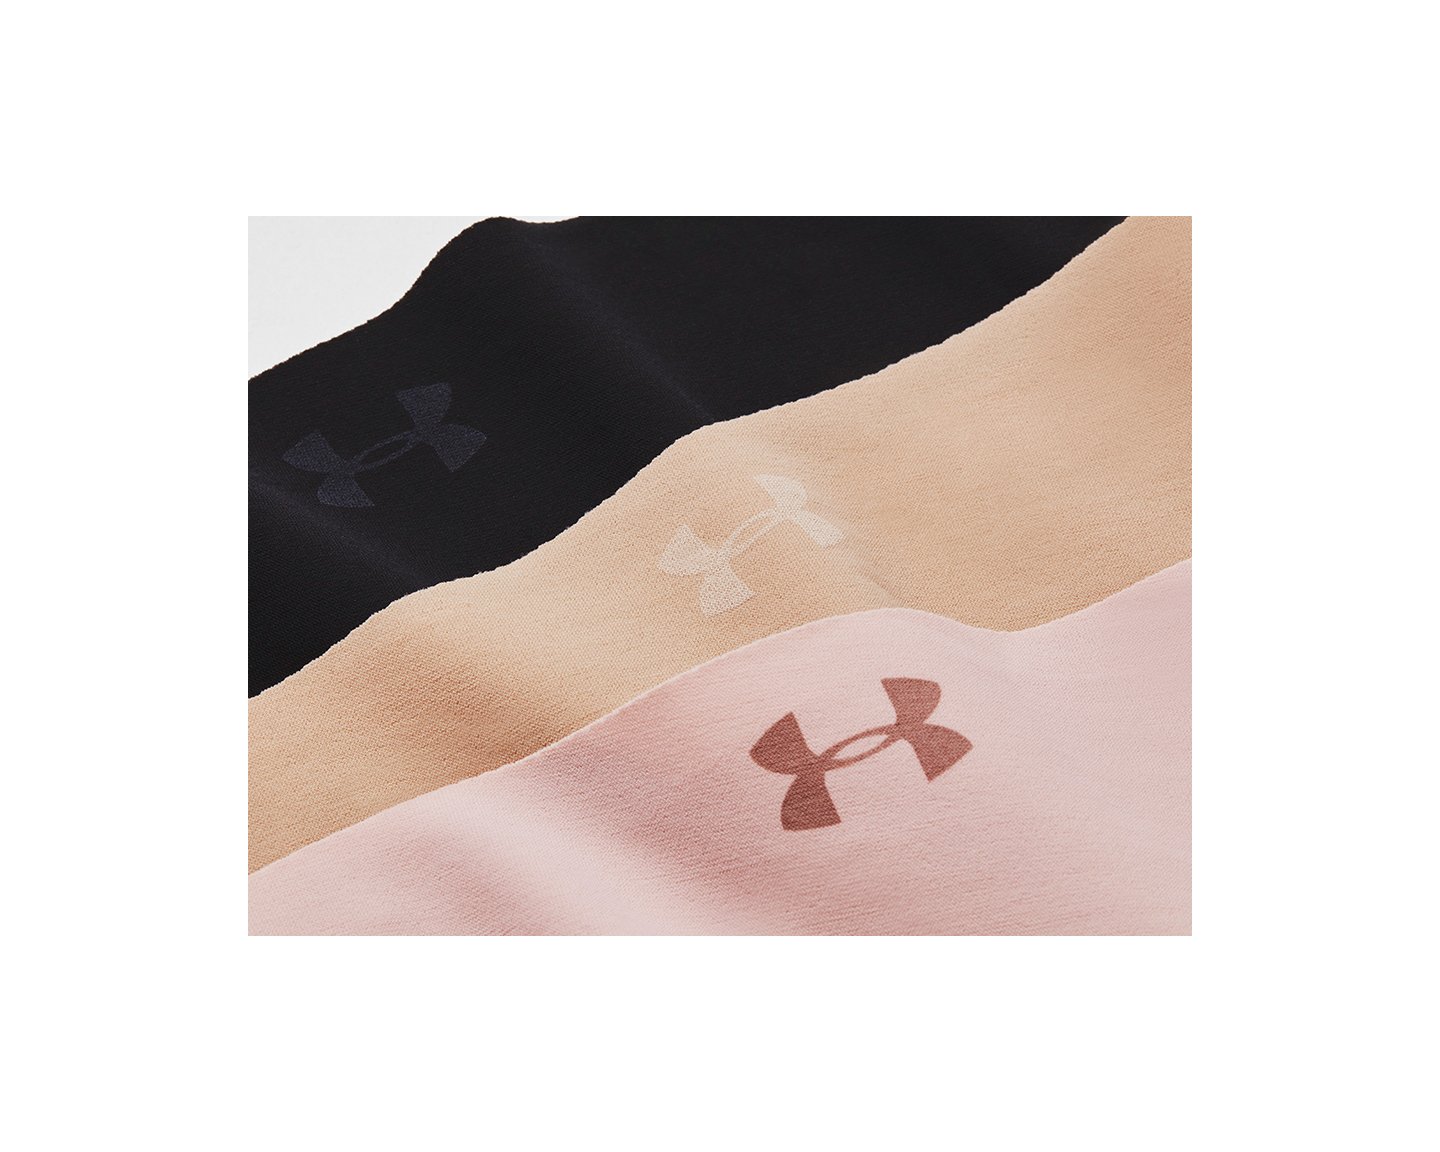 Under Armour Pure Stretch Hipster Briefs, Pack of 3, Black, XS